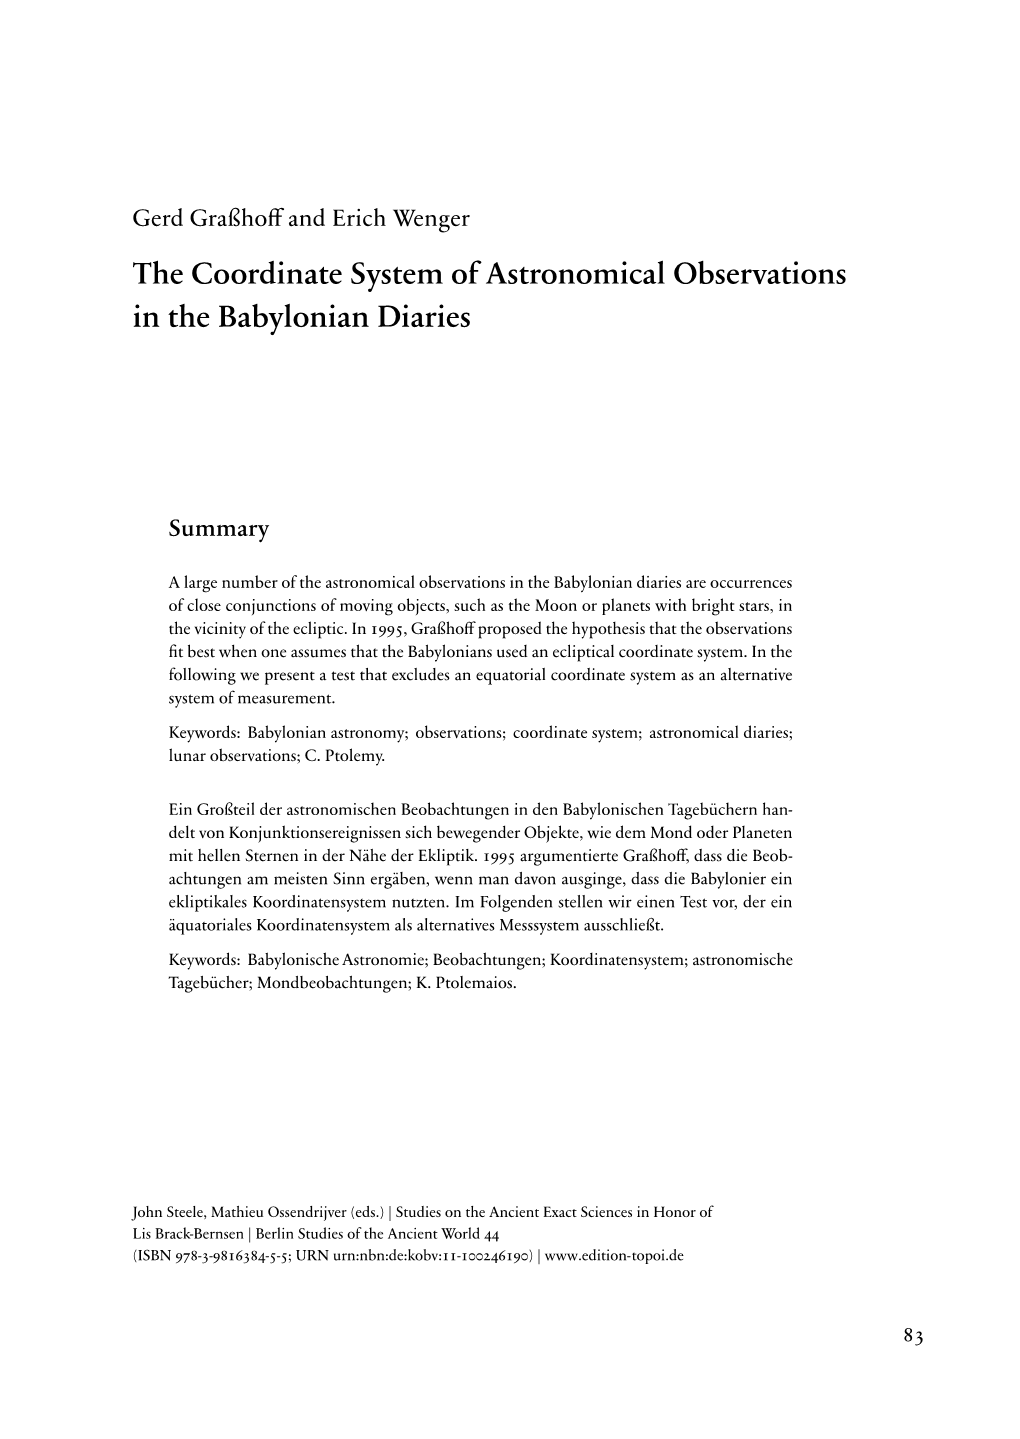 The Coordinate System of Astronomical Observations in the Babylonian Diaries